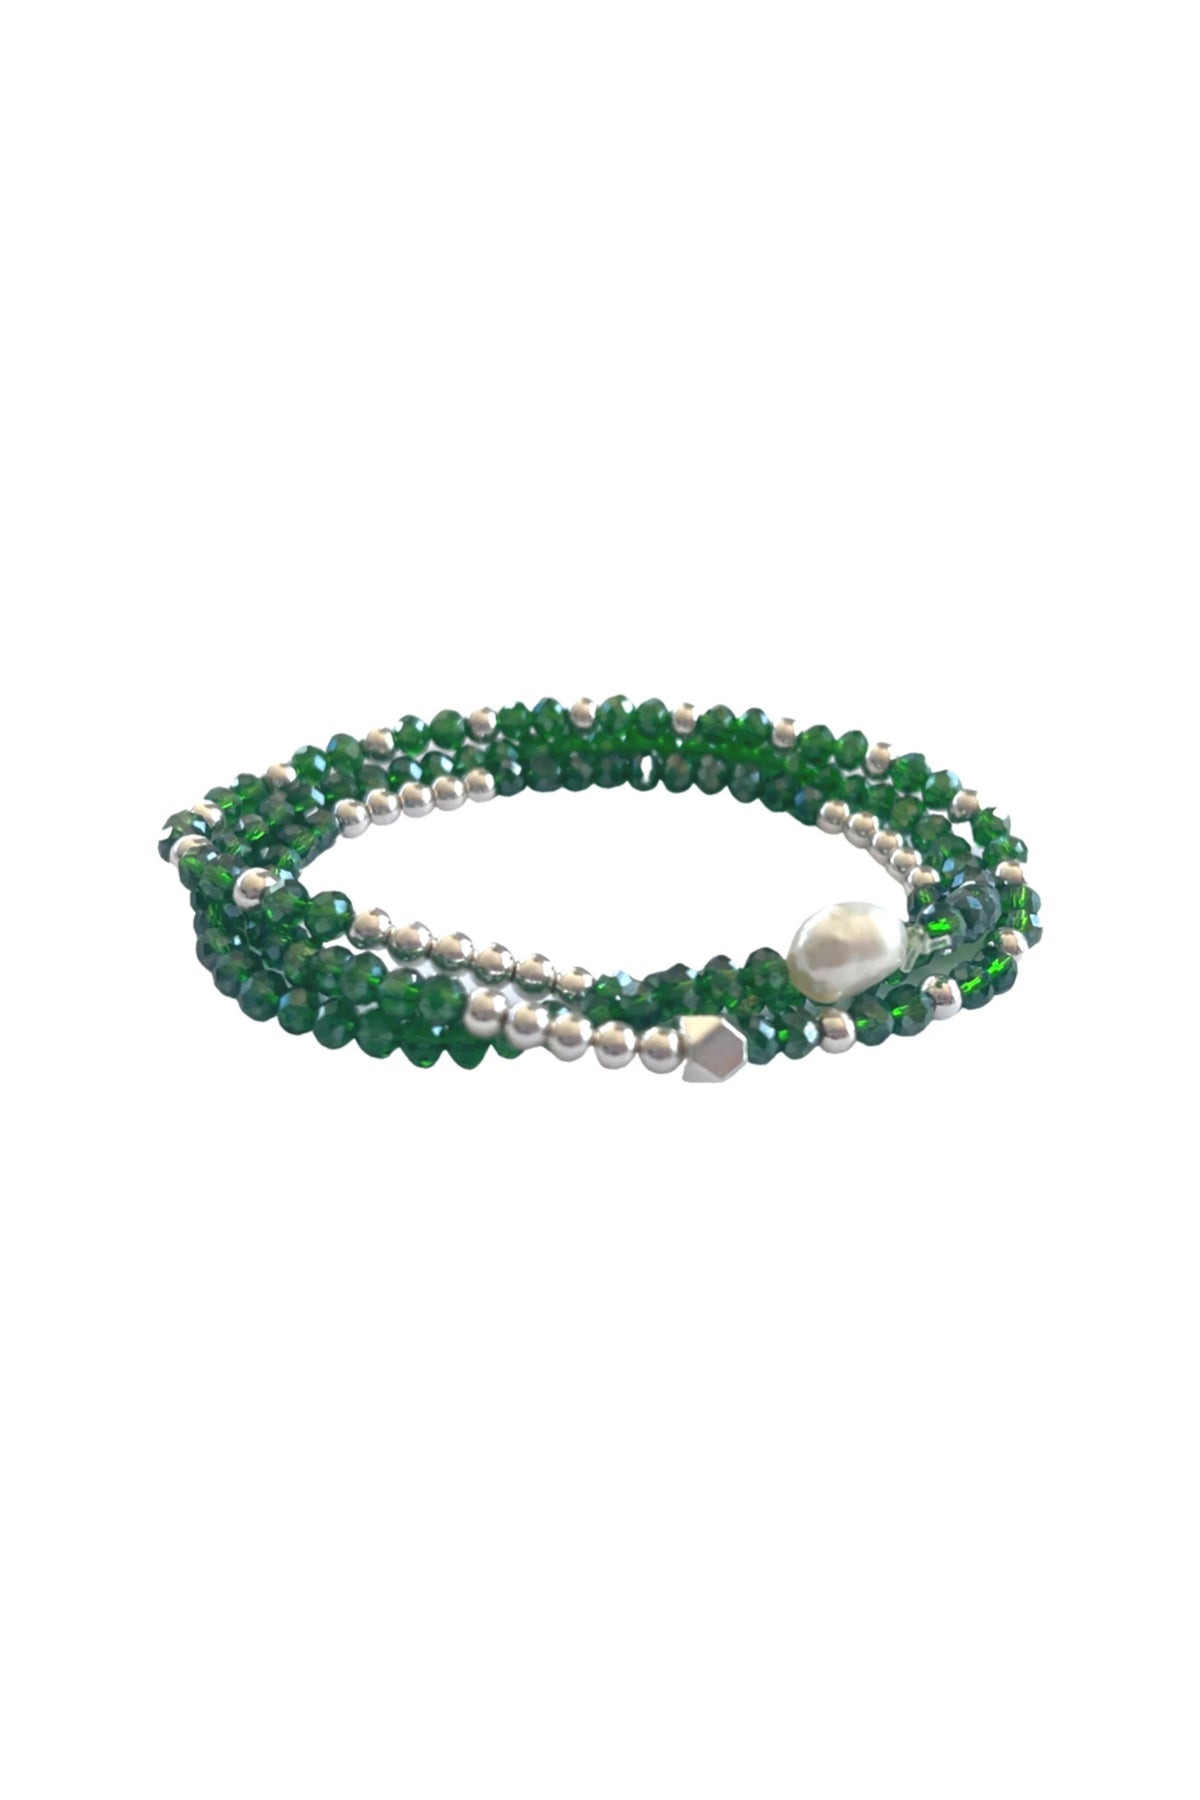 Emerald Pearl And Silver Beaded Bracelet Set